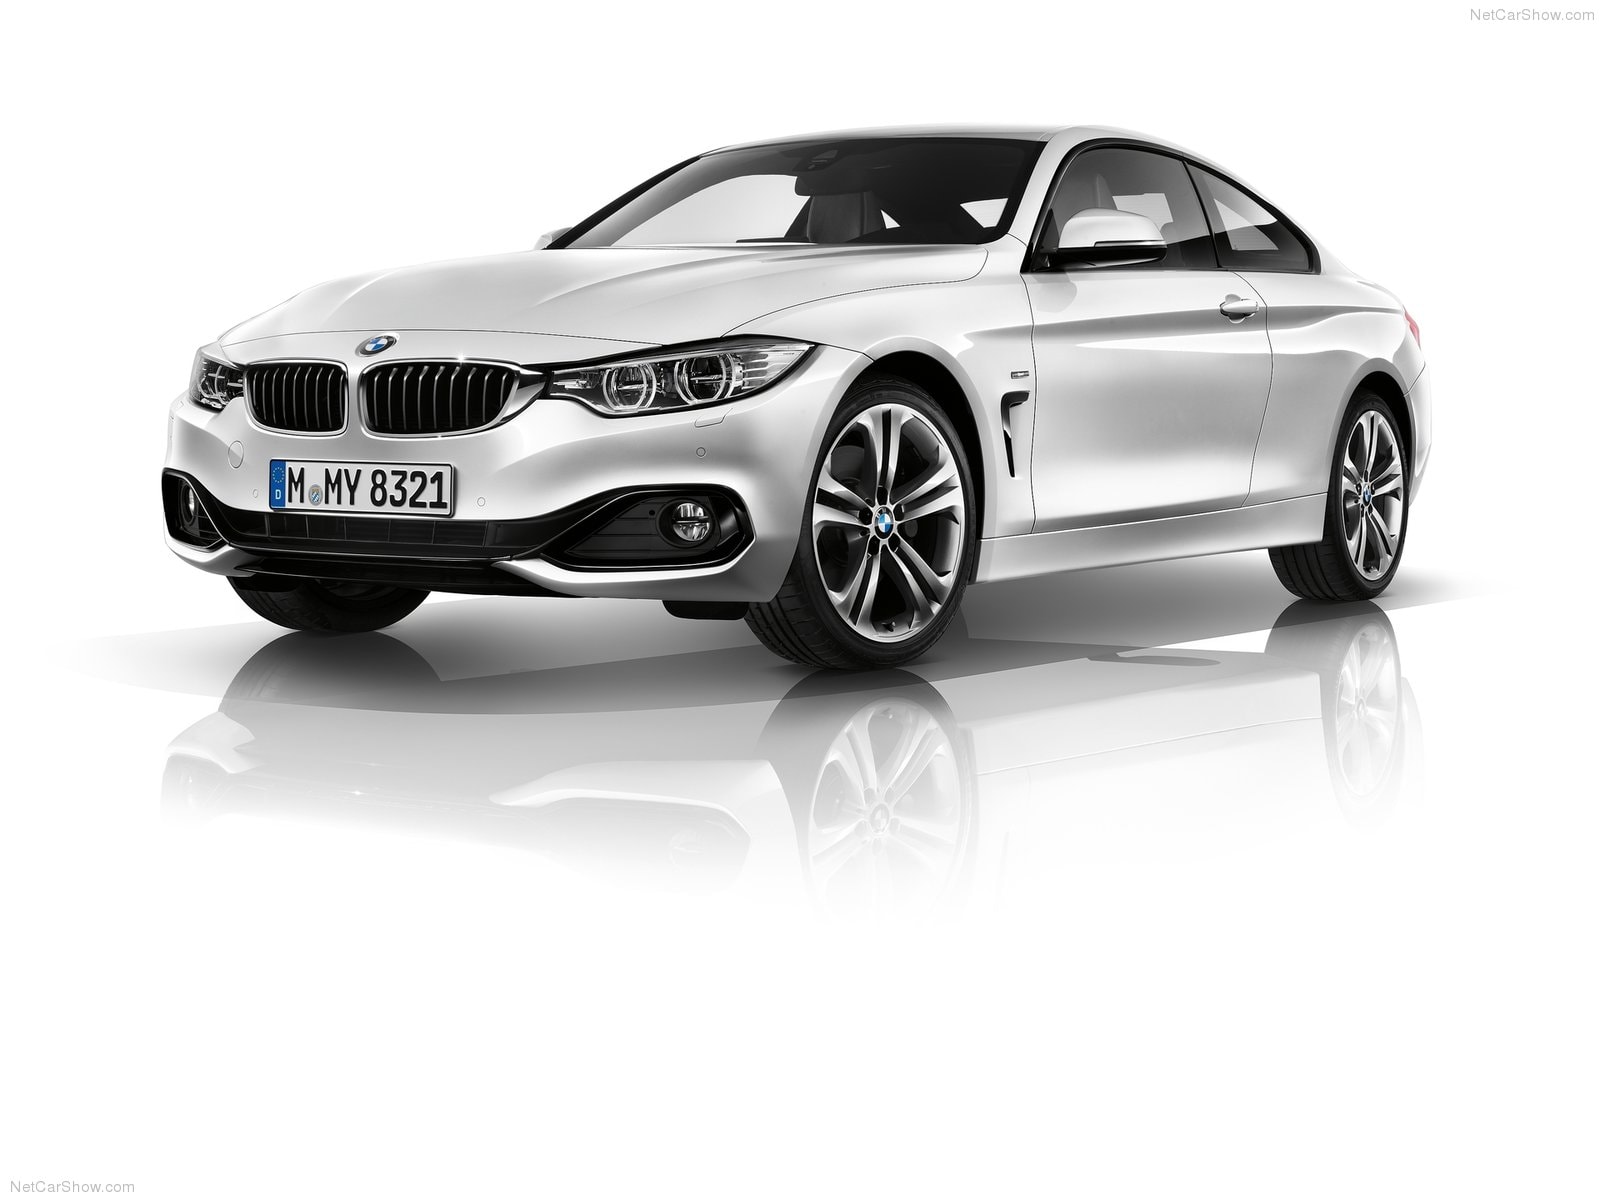 BMW F32 435d xDrive Will Be the Fastest 4 Series Available